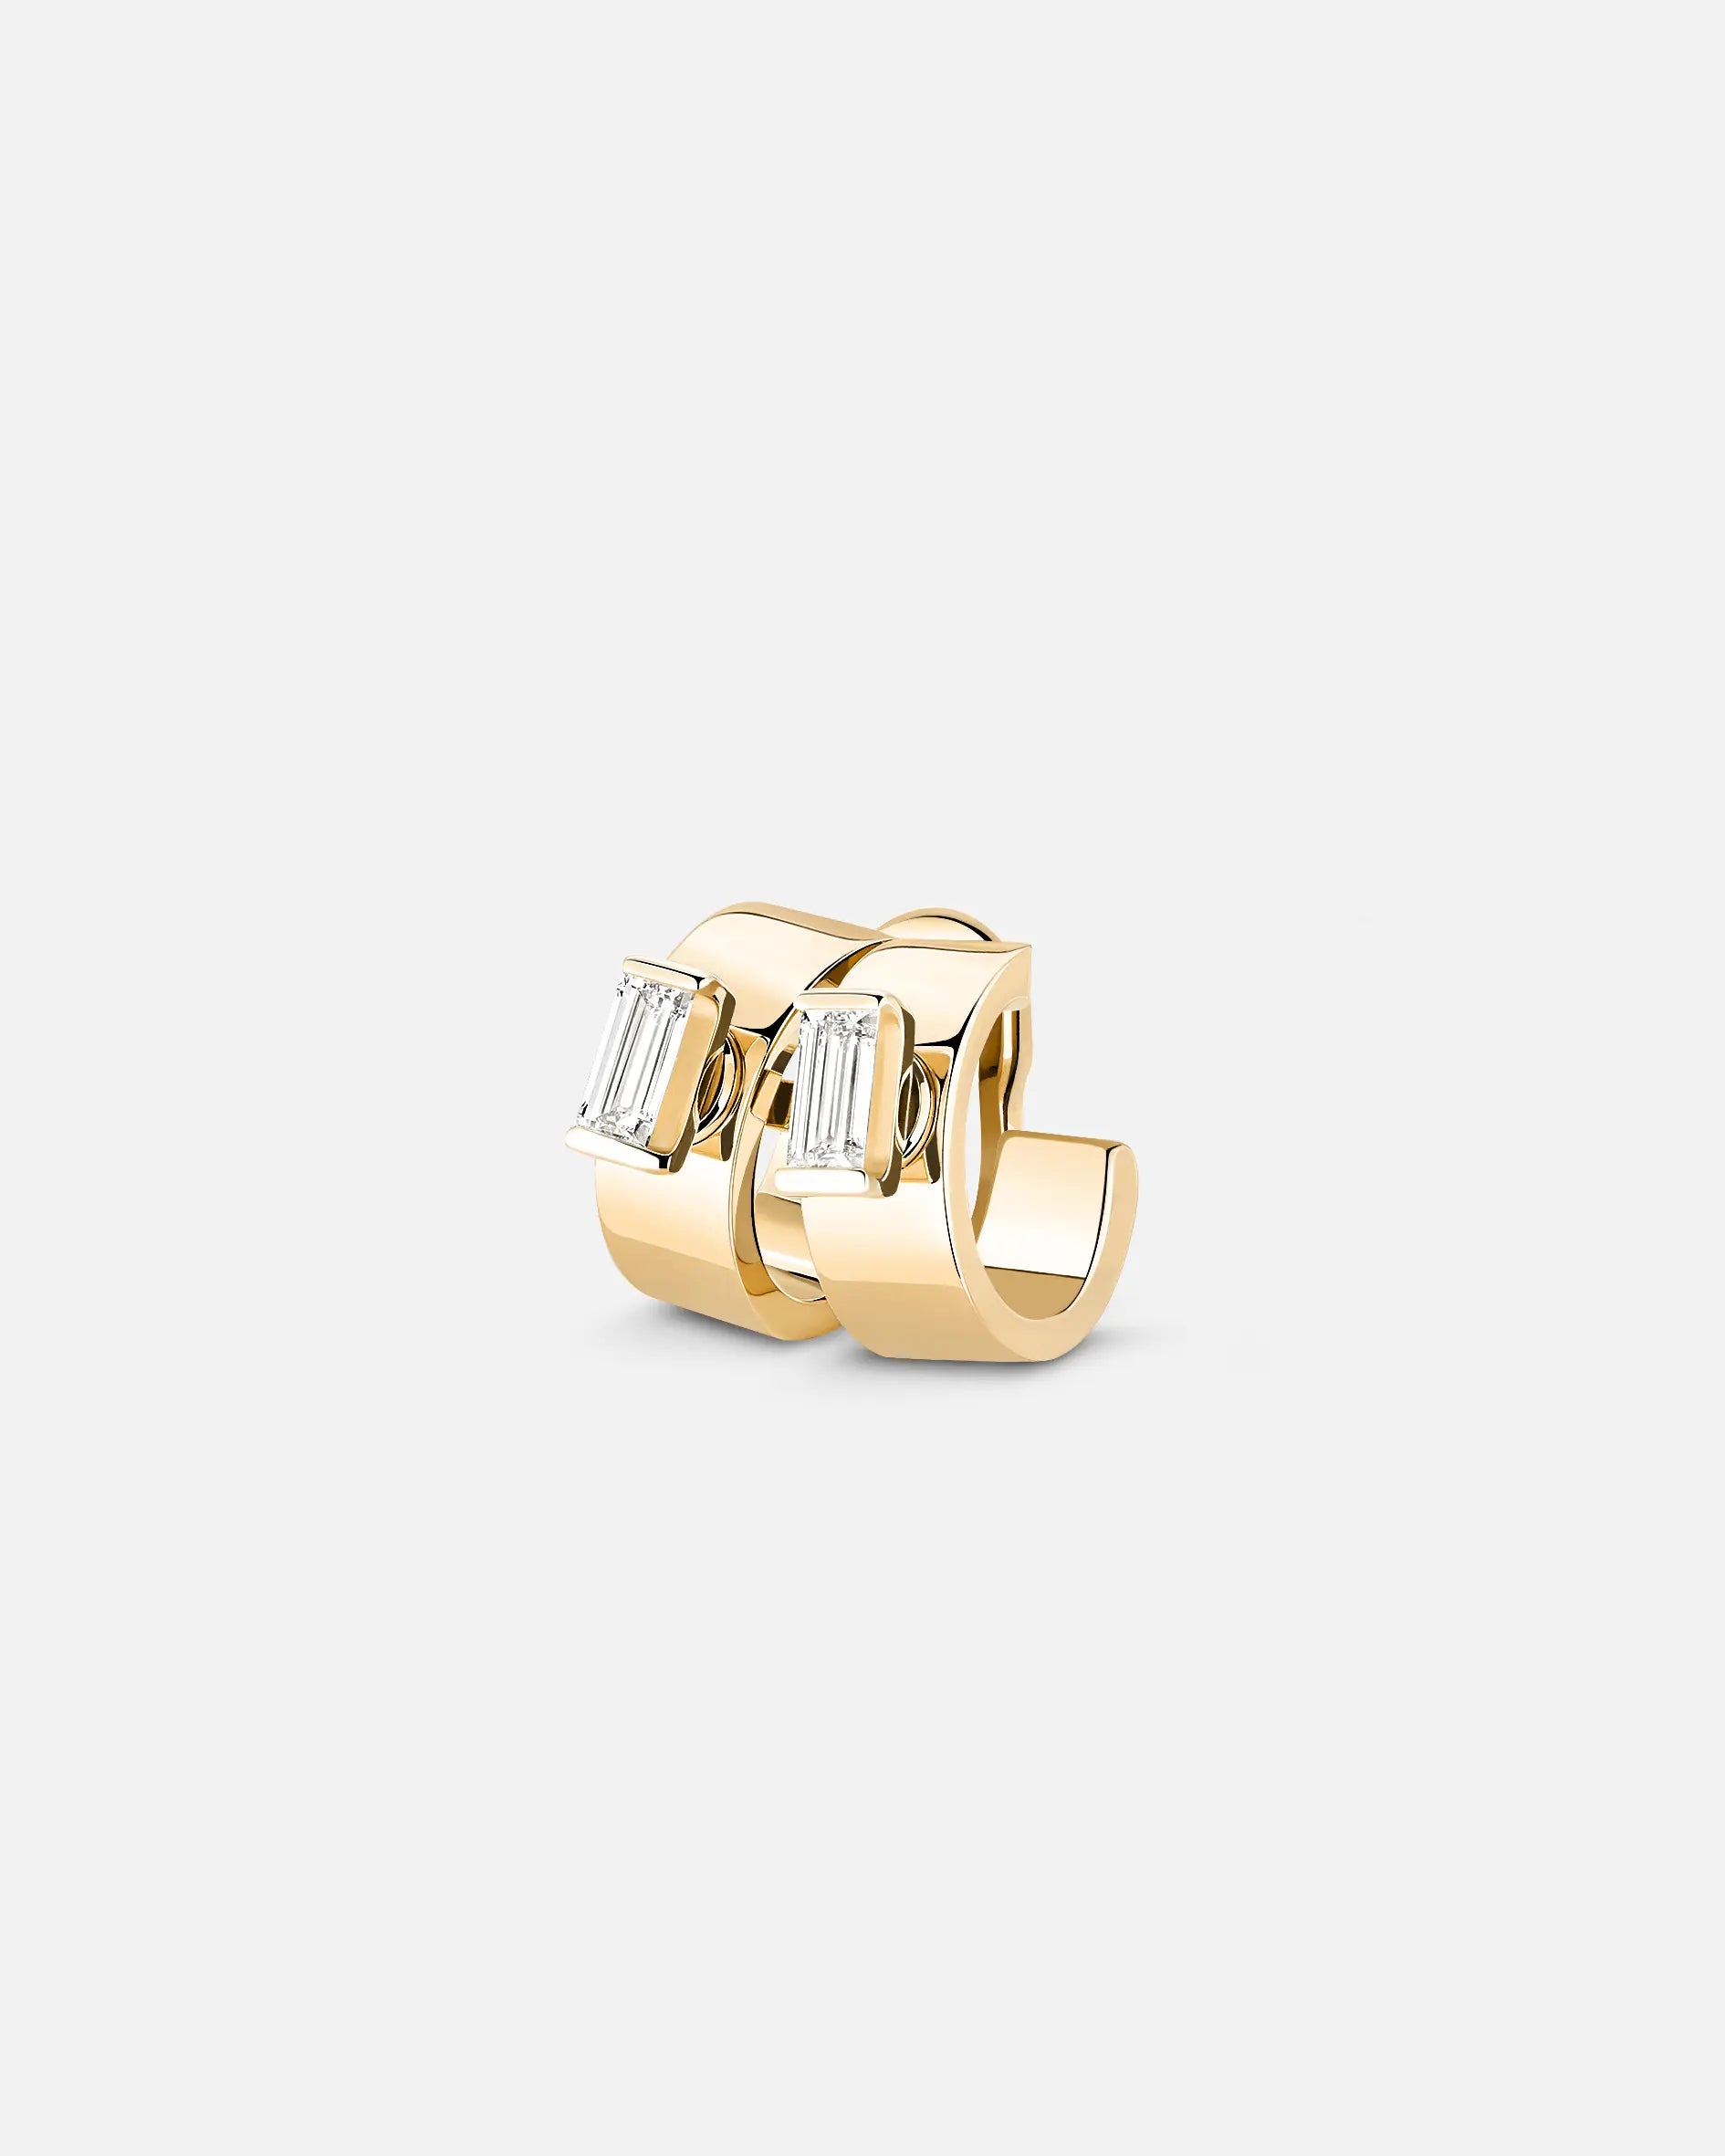 Dinner Date Ear Clip in Yellow Gold - 1 - Nouvel Heritage